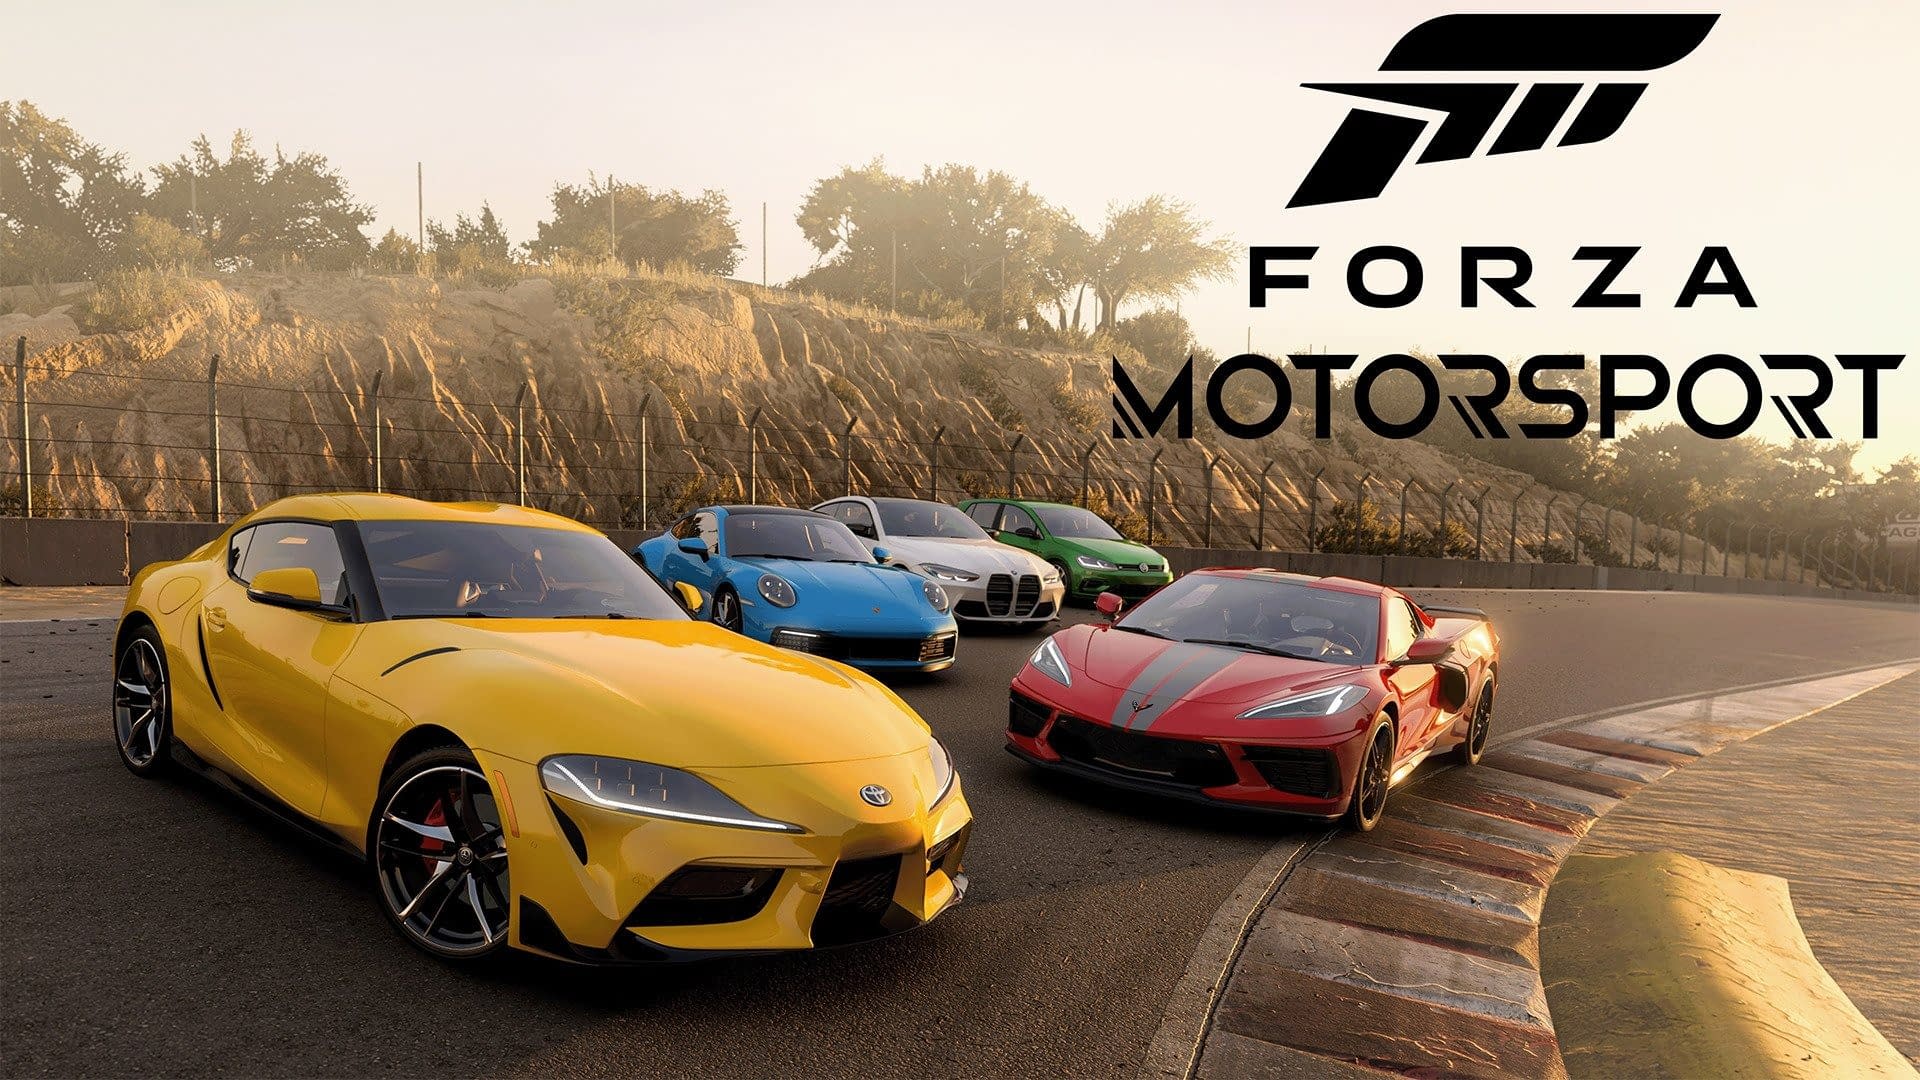 Official 18 Minutes Play Video for Forza Motorsport Published